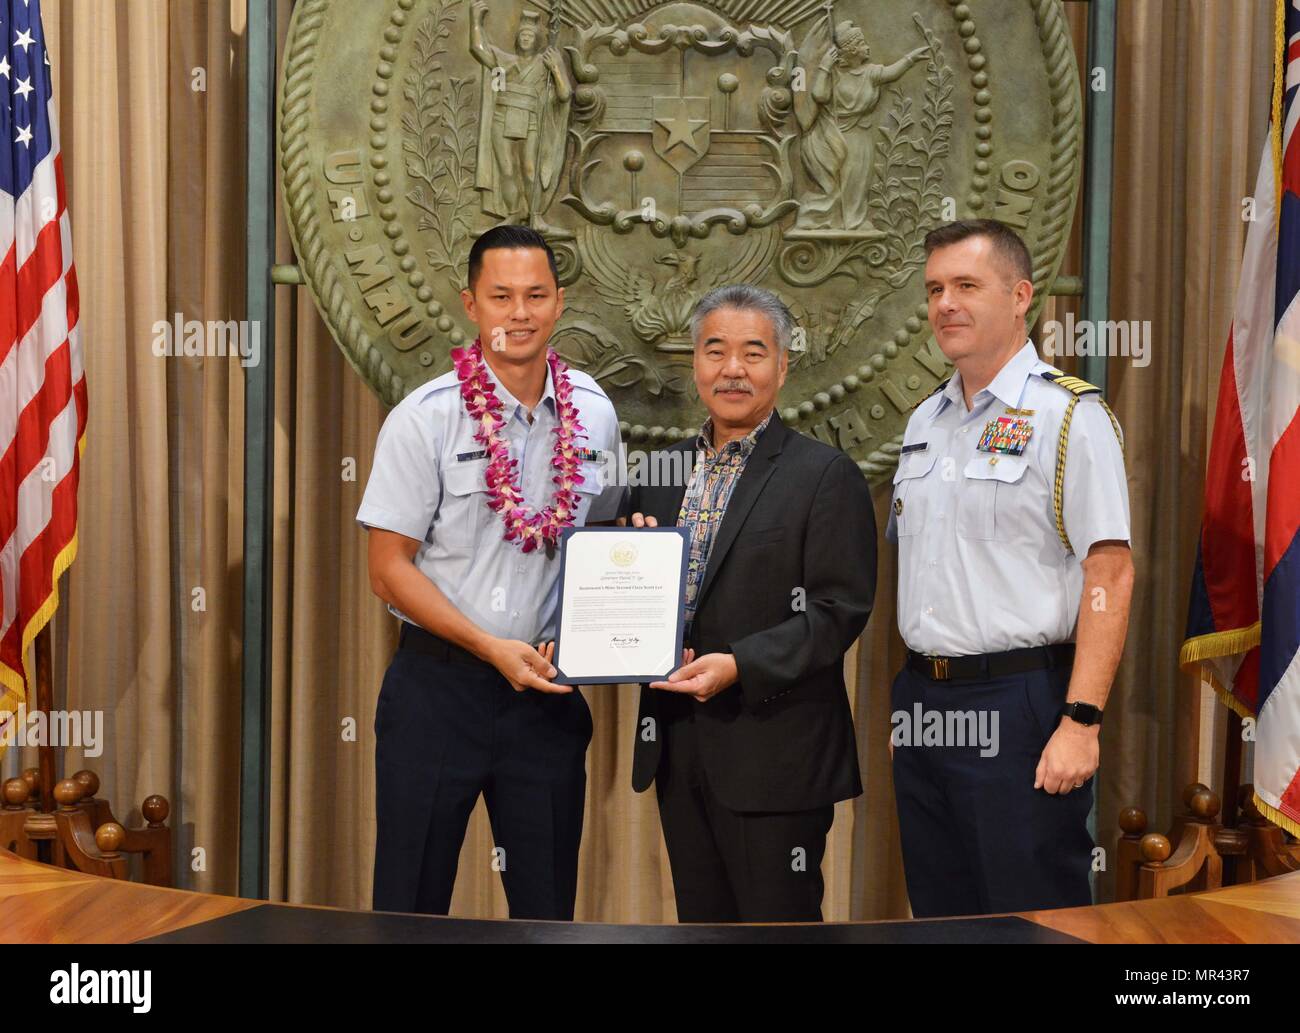 Petty Officer 2nd Class Scott Lee, a boatswain’s mate stationed at Coast Guard Station Honolulu, was recognized for his outstanding community service by Hawaii State Governor David Y. Ige and Capt. Brian Penoyer, Fourteenth Coast Guard District chief of staff, at the Hawaii State Capitol, May 5, 2017. The Military Affairs Council of the Chamber of Commerce Hawaii joined Governor Ige in a proclamation ceremony designating May as Military Appreciation Month and honoring service members from all five branches of the armed forces for their community service contributions. (U.S. Coast Guard photo b Stock Photo